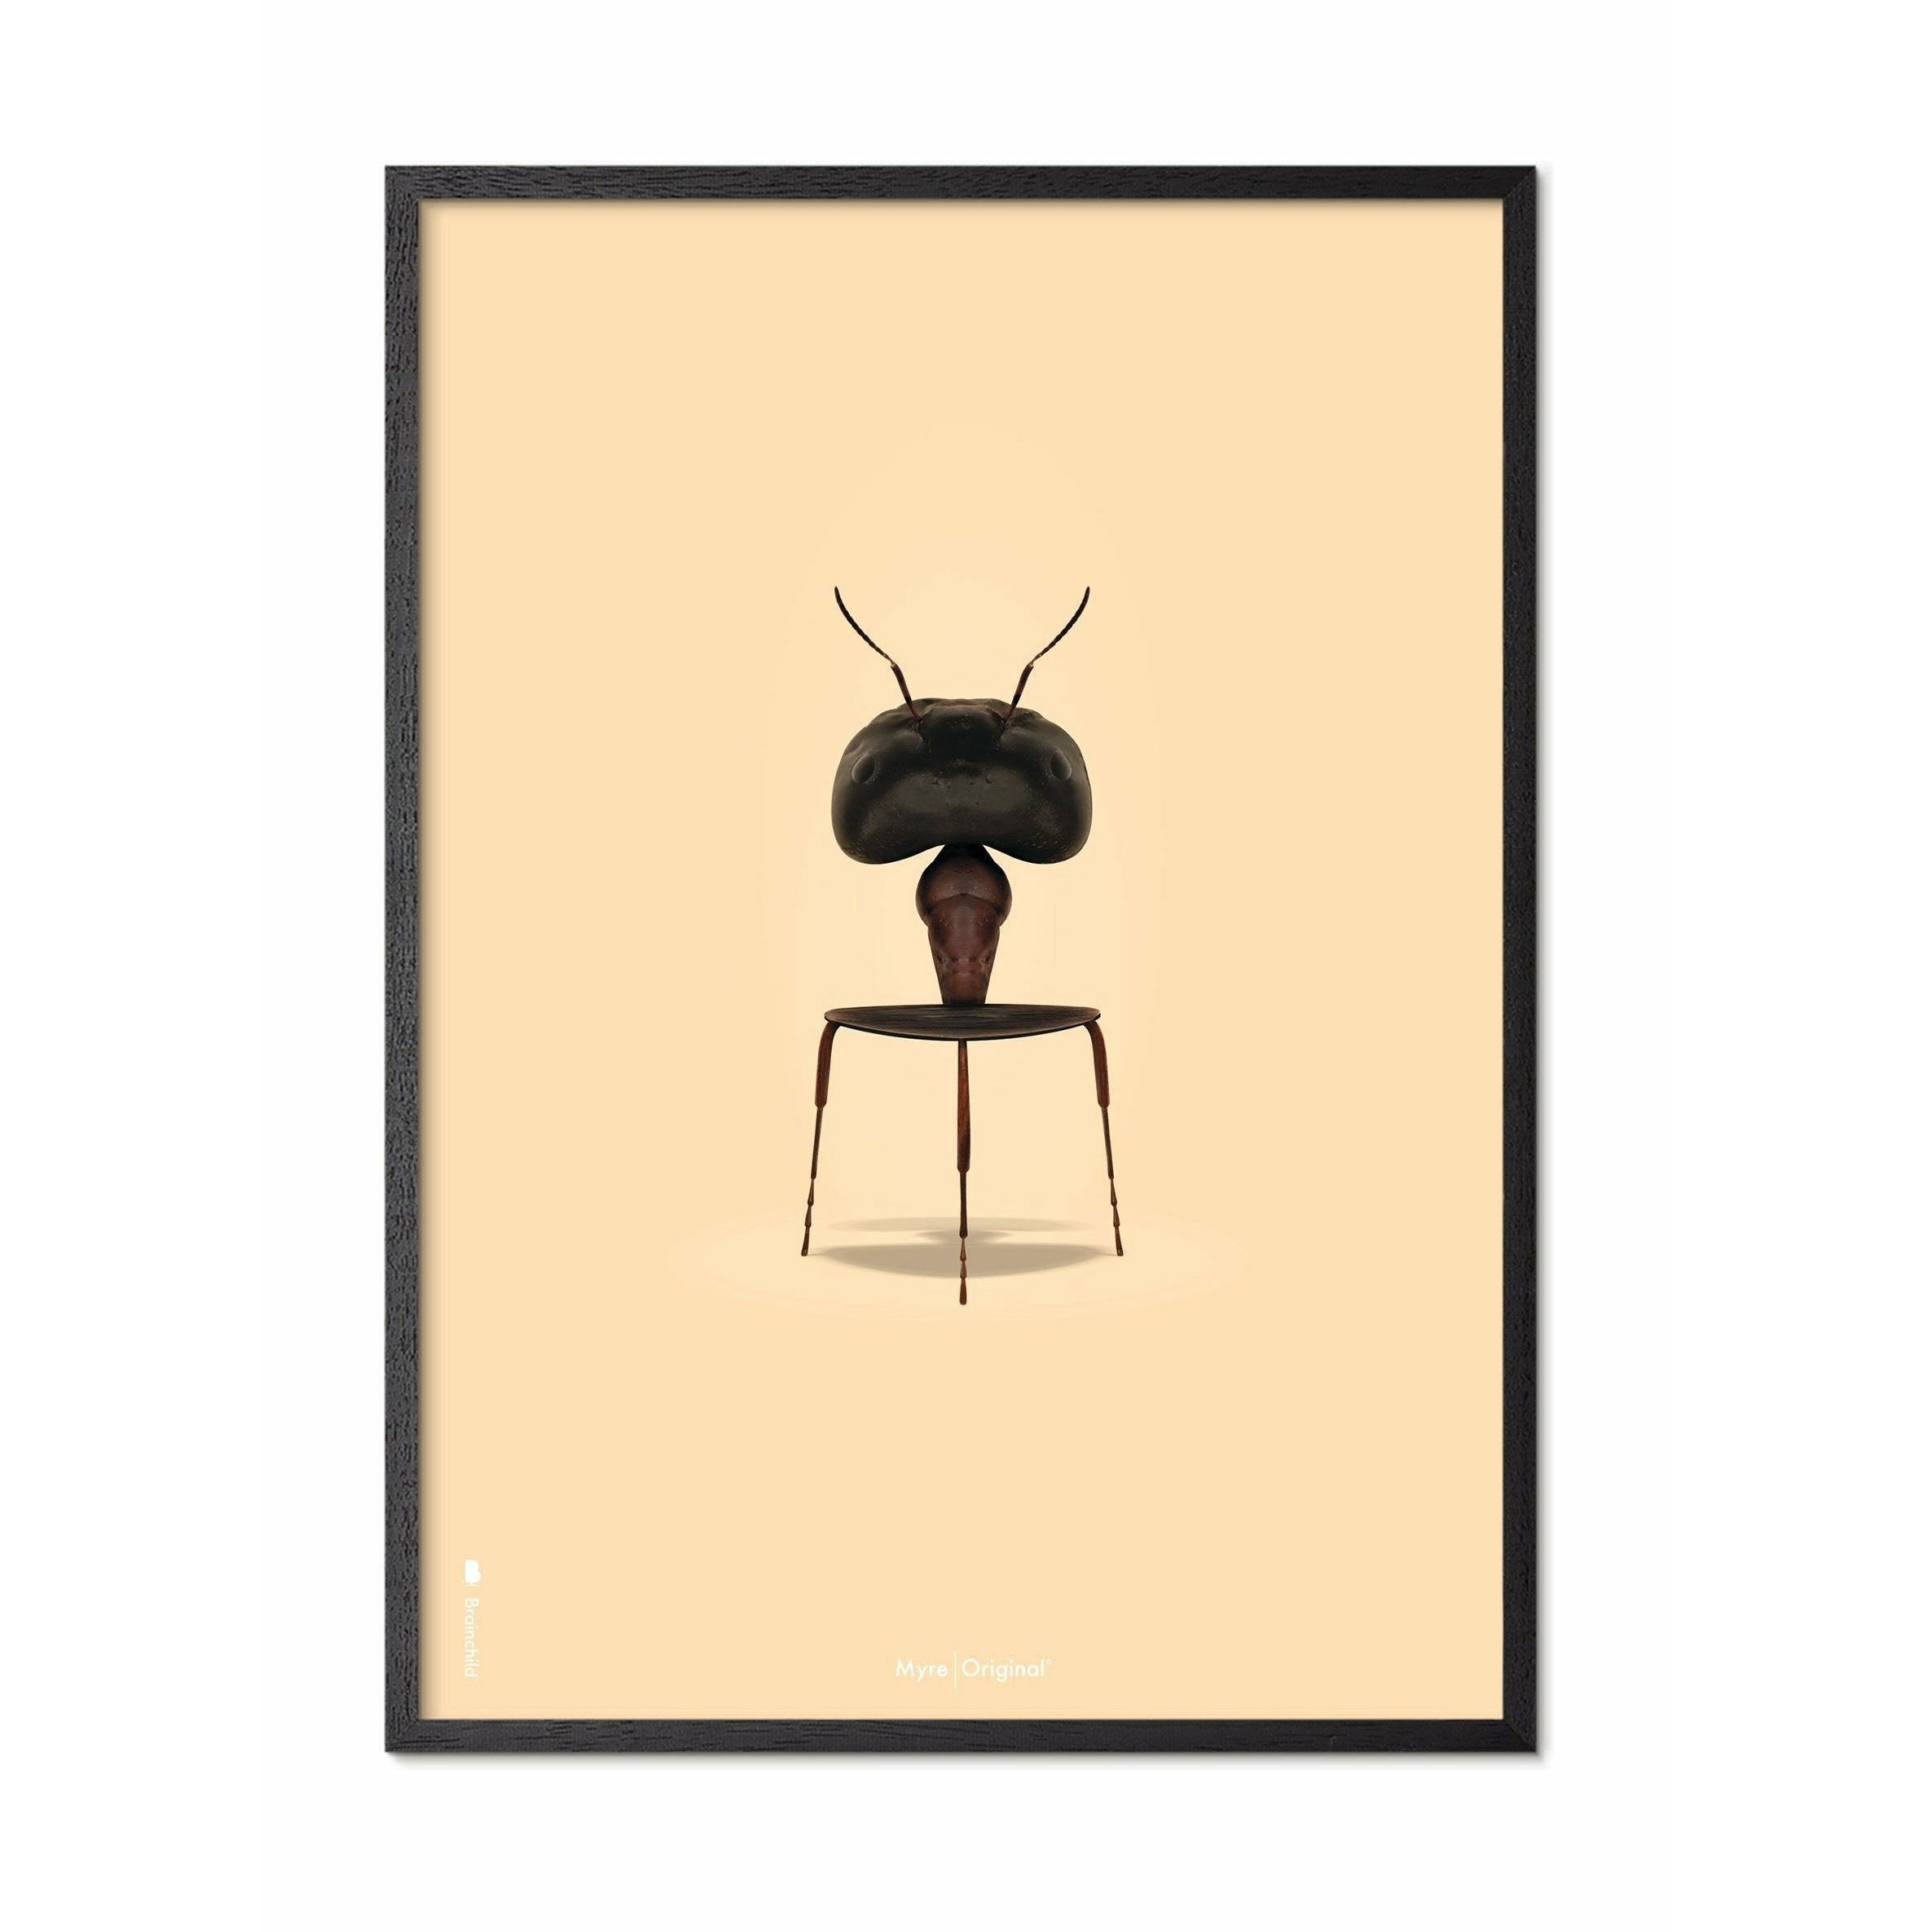 Brainchild Ant Classic Poster, Frame In Black Lacquered Wood 70x100 Cm, Sand Colored Background